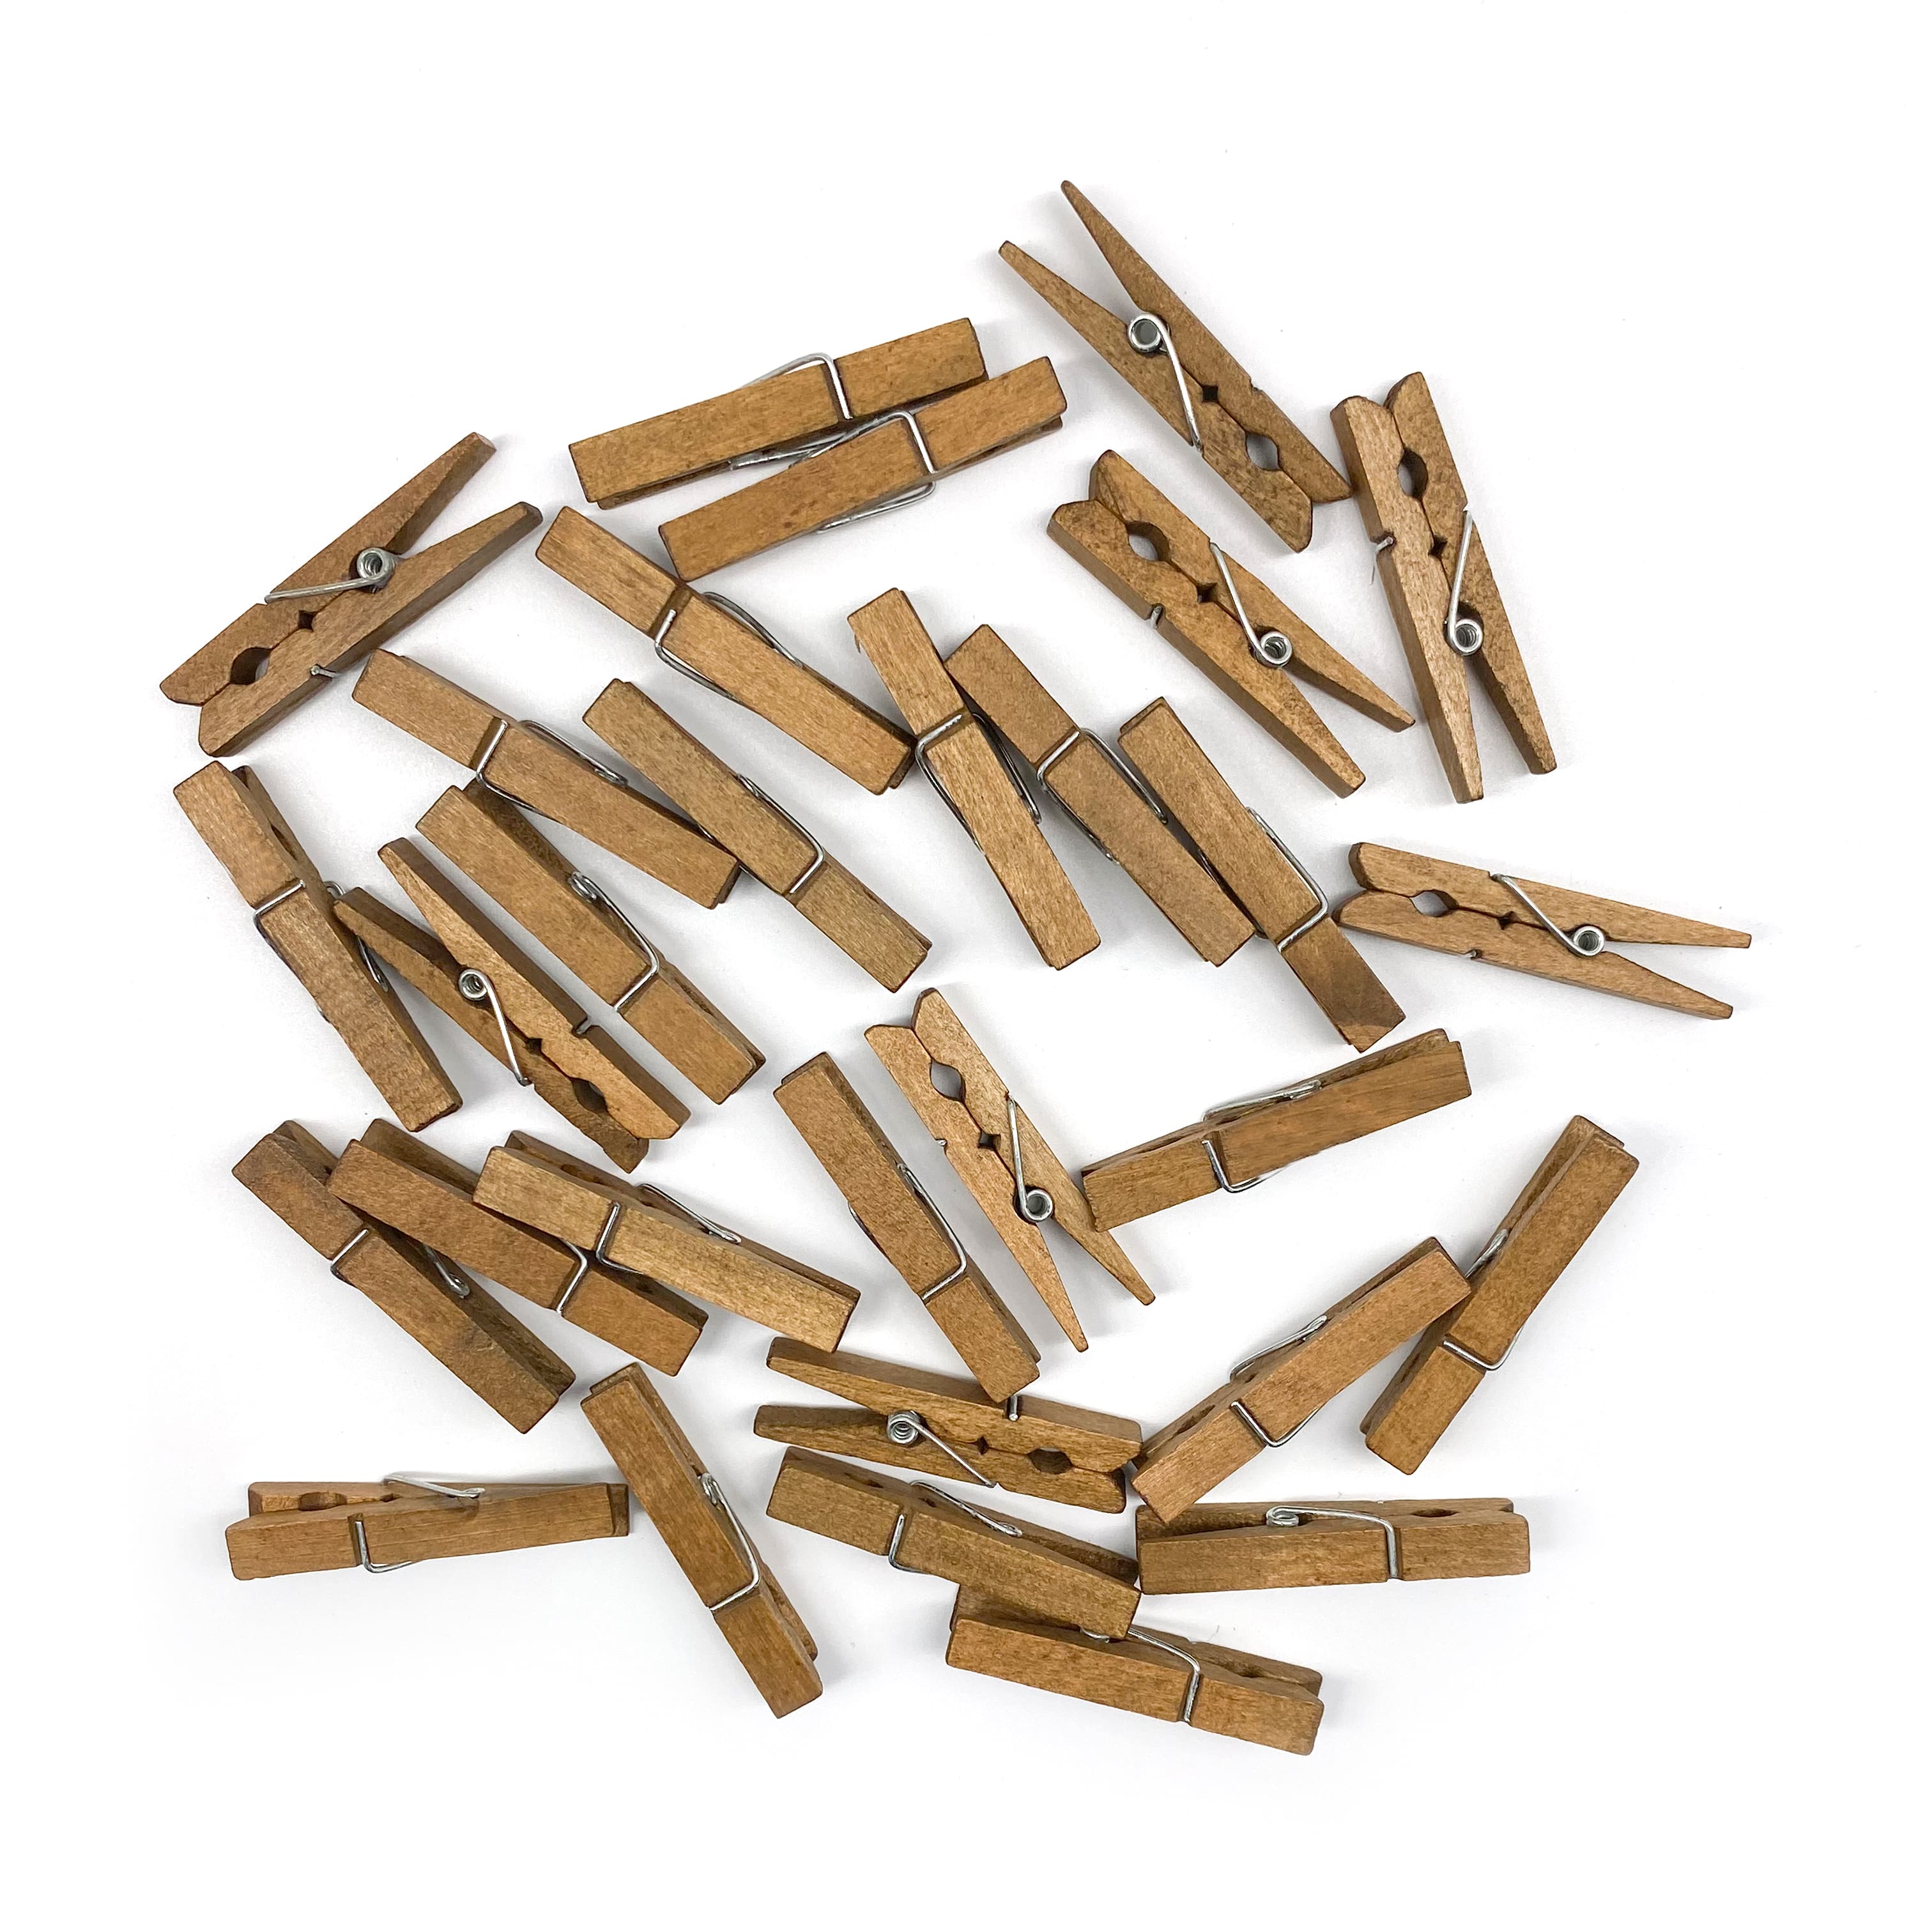 12 Packs: 30 ct. (360 total) Medium Walnut Clothespins by Recollections&#x2122;